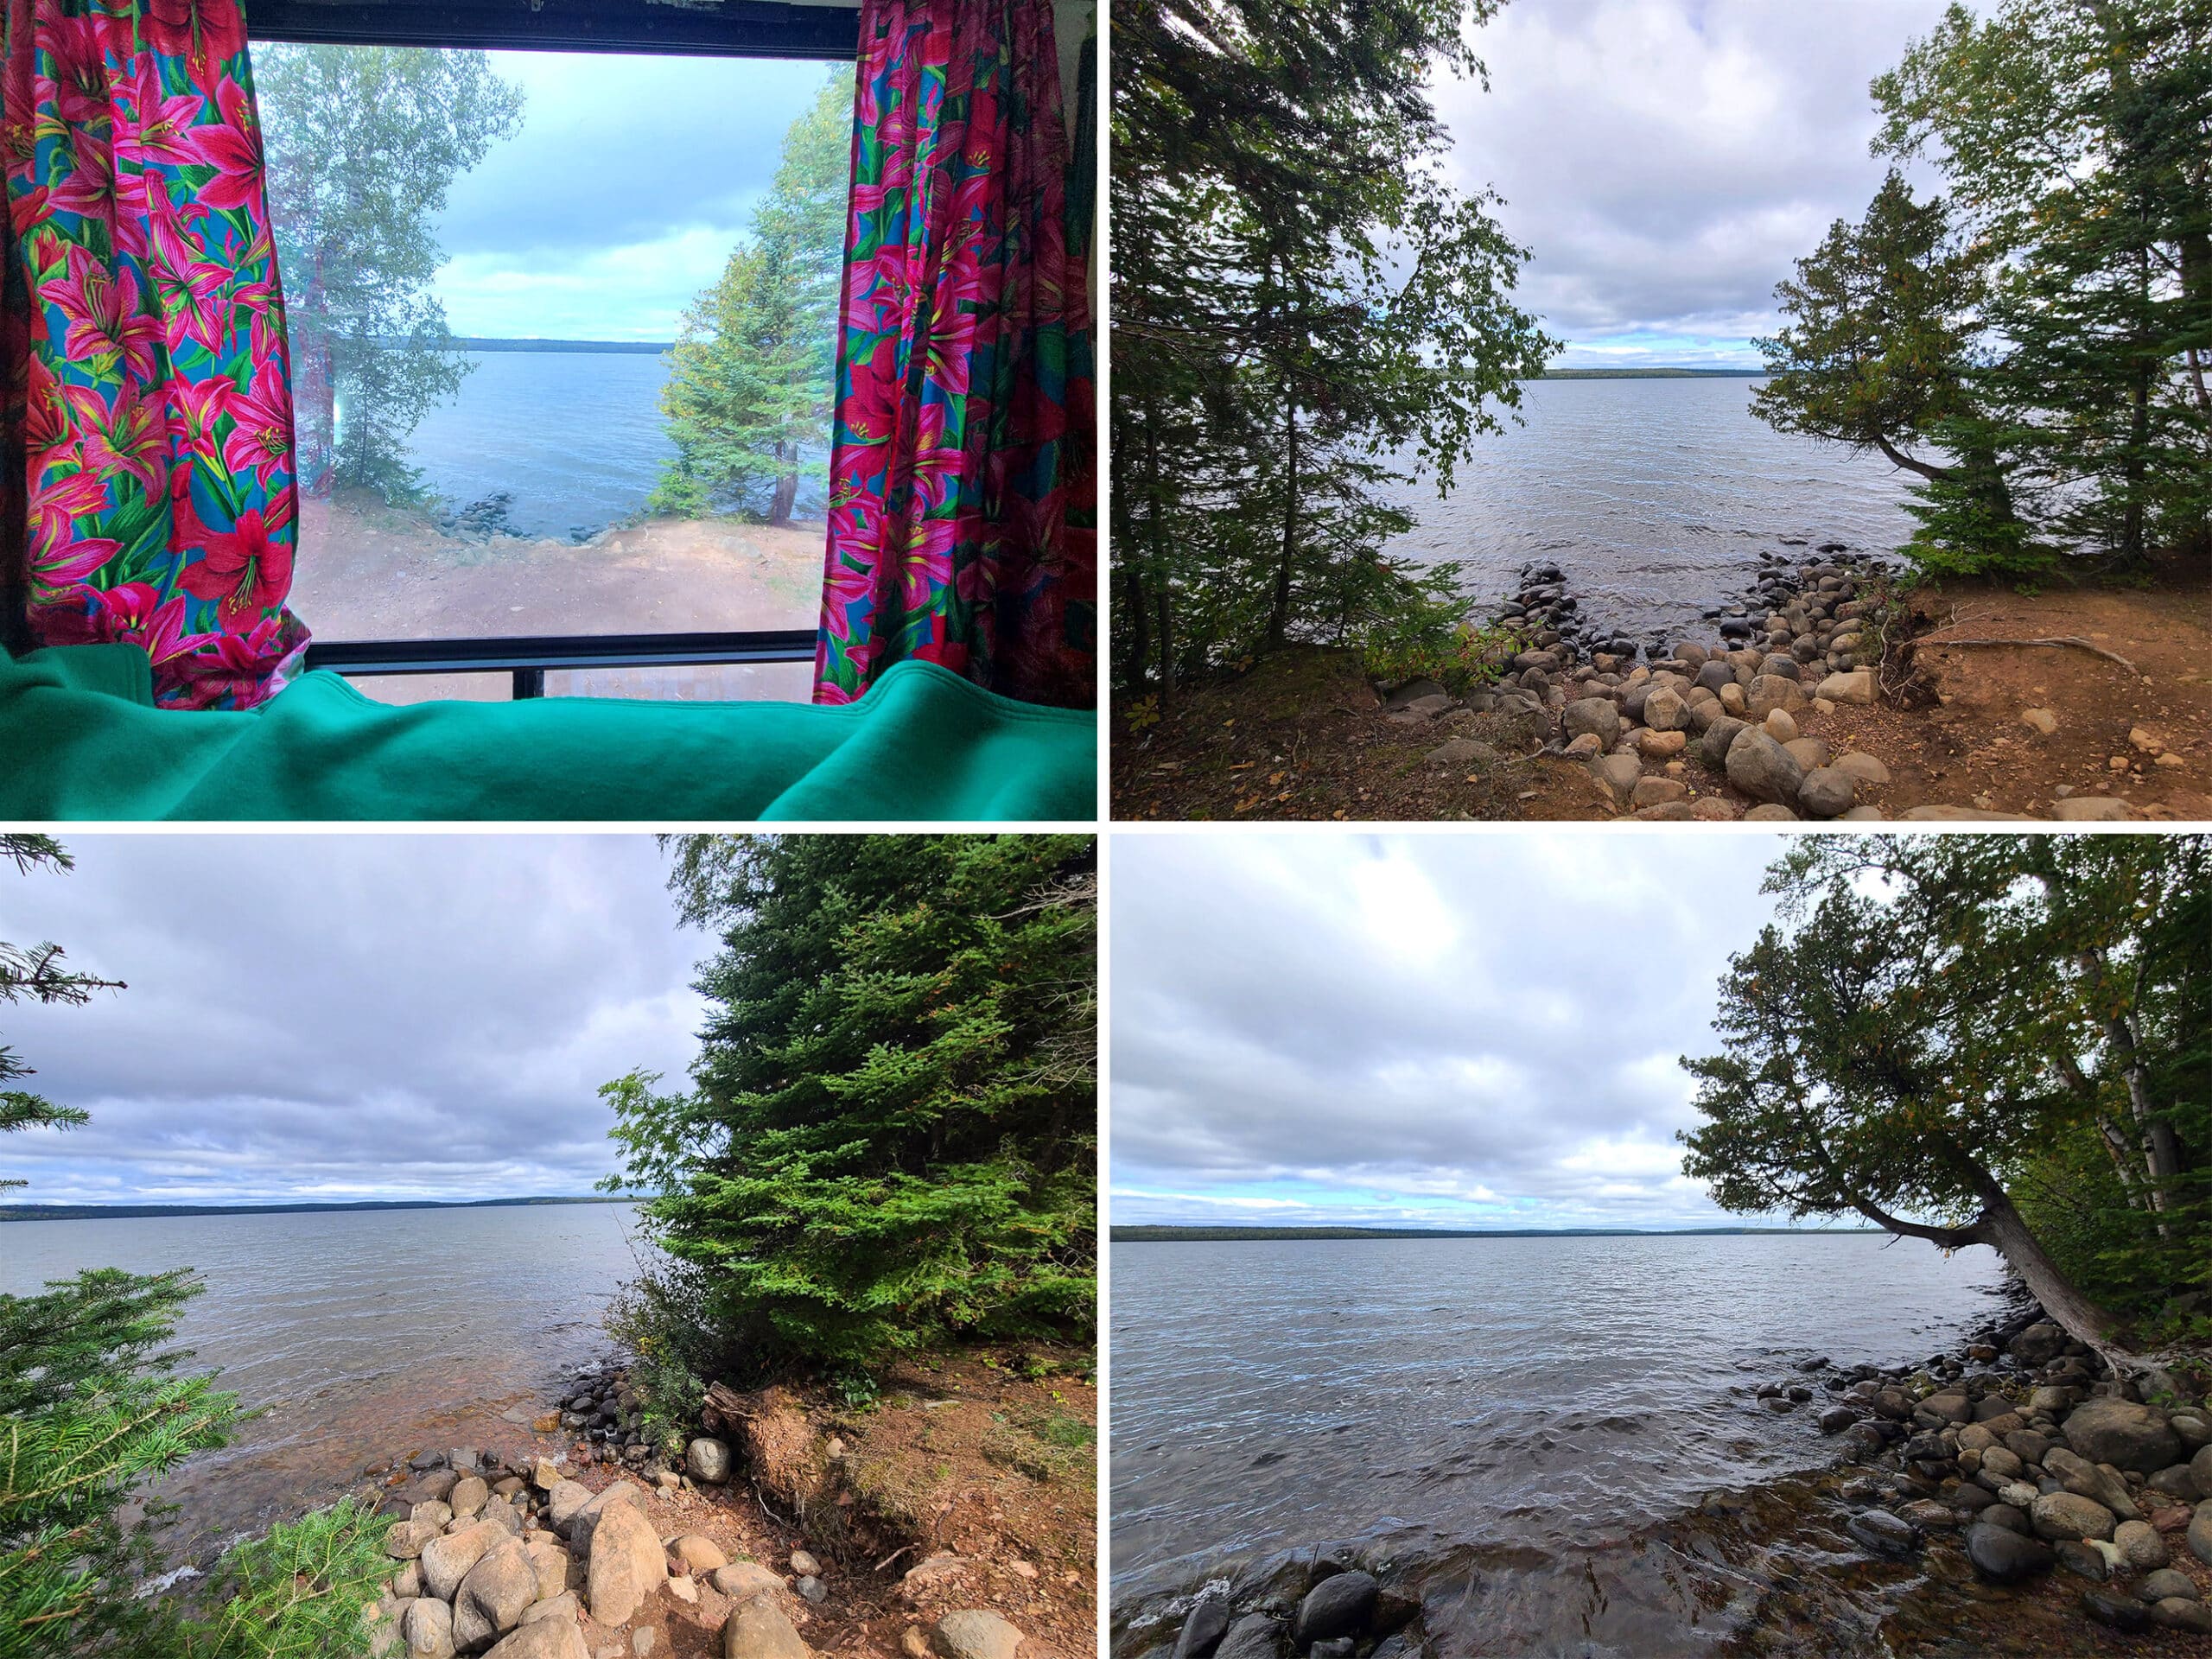 4 part image showing various views from a campsite overlooking Marie Louise Lake in Sleeping Giant provincial park.